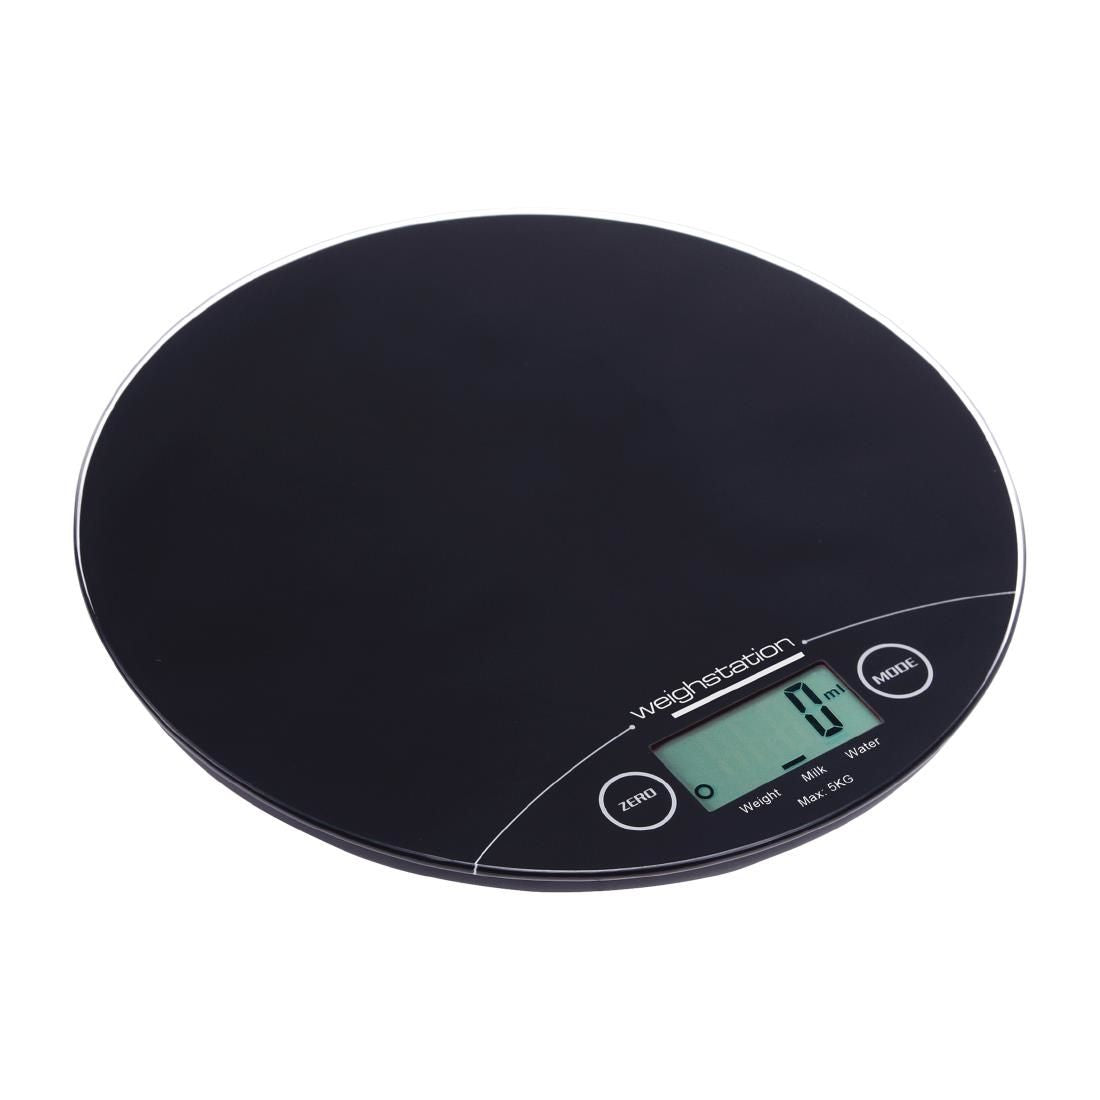 GG017 Weighstation Electronic Round Scales 5kg JD Catering Equipment Solutions Ltd